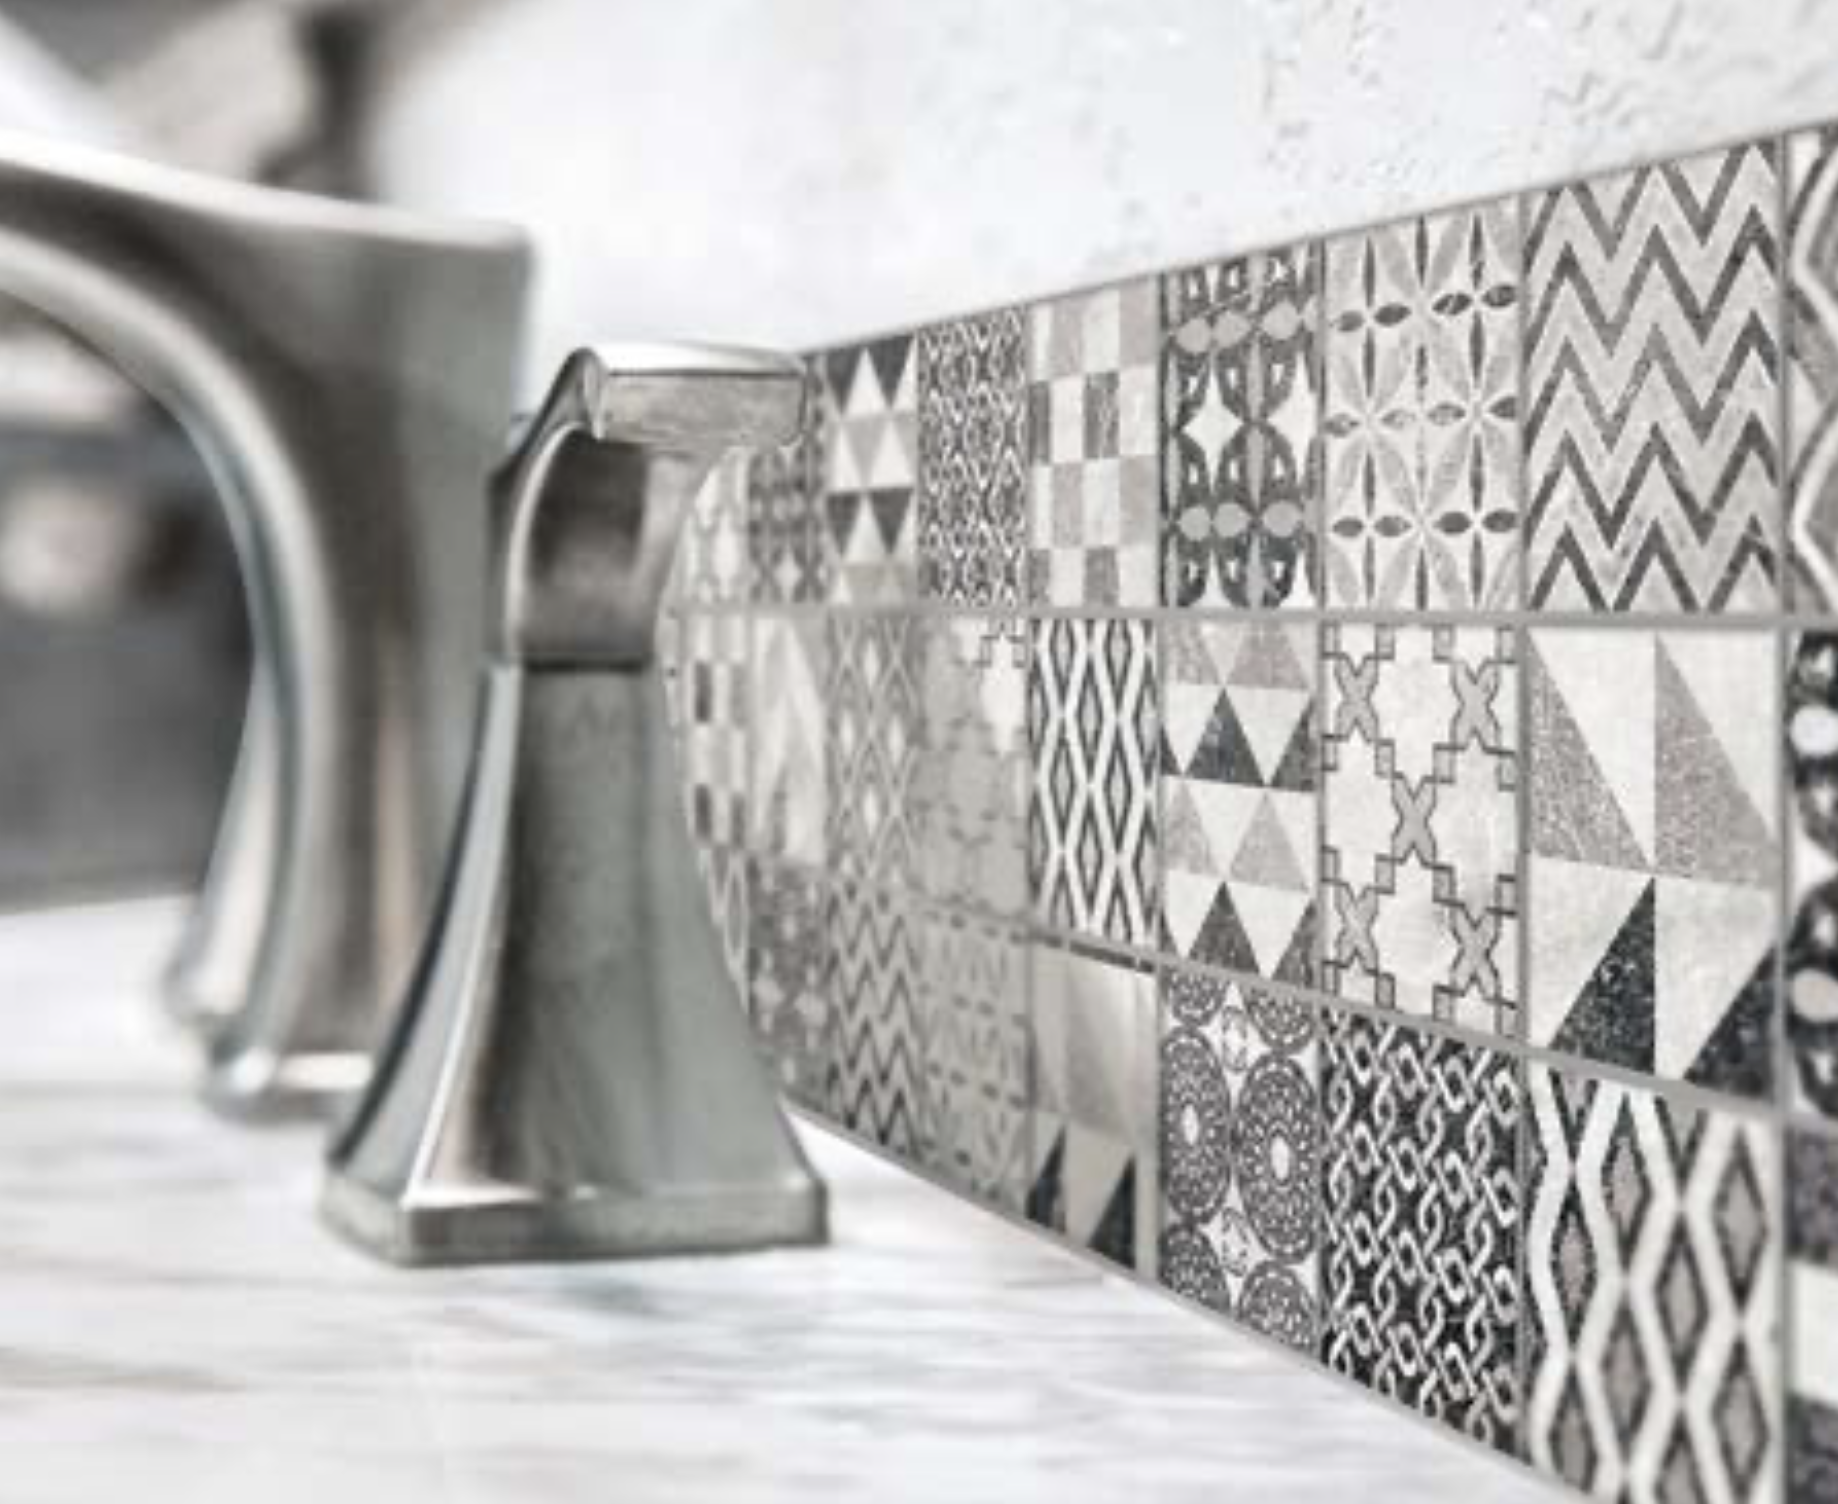 Shows a catalog scene featuring a decorative black and white backsplash on small tiles behind a steel faucet sink